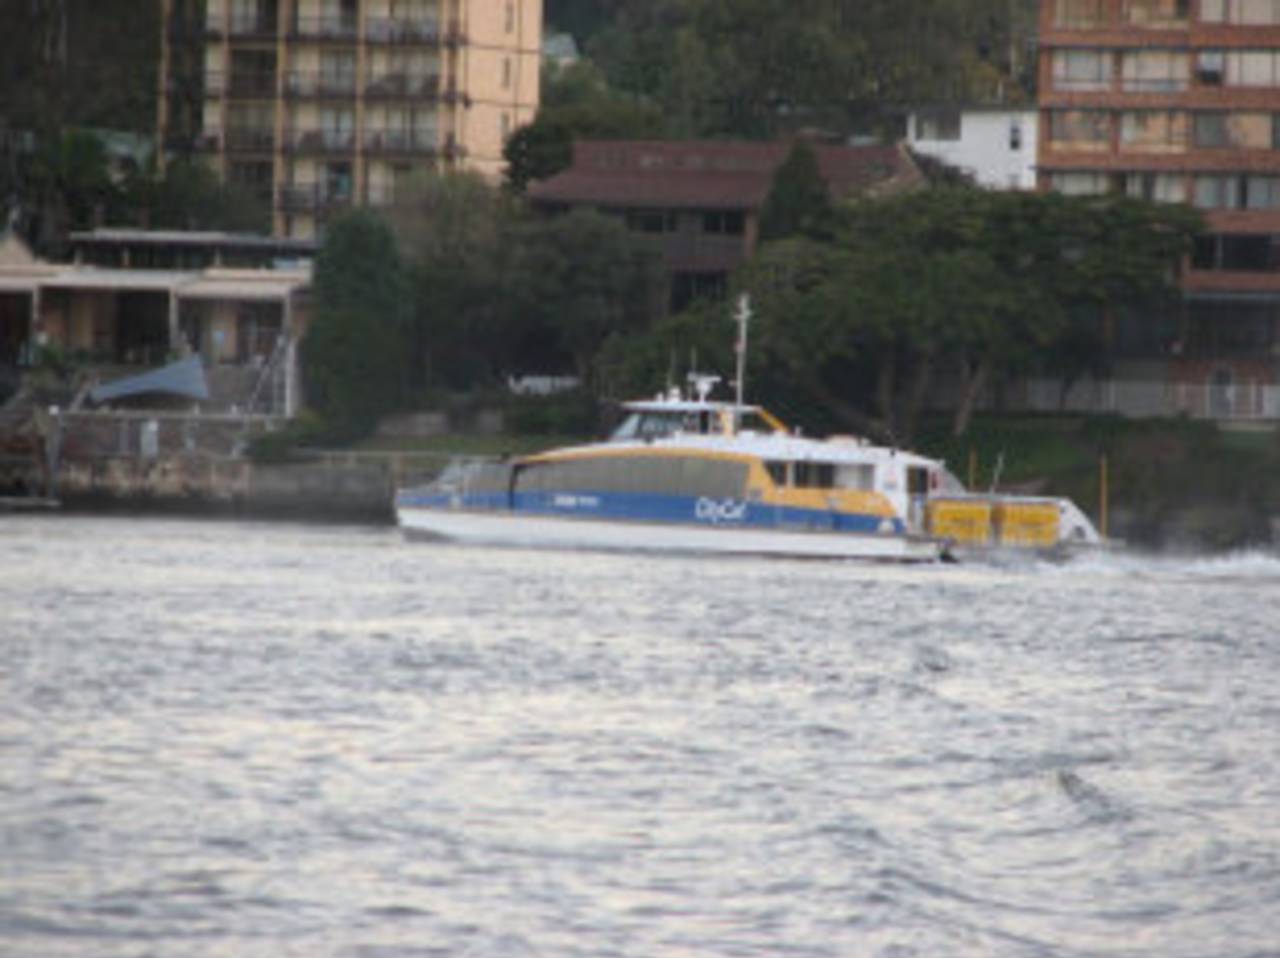 The City Cat, a catamaran ferry on the Brisbane River, August 8, 2012